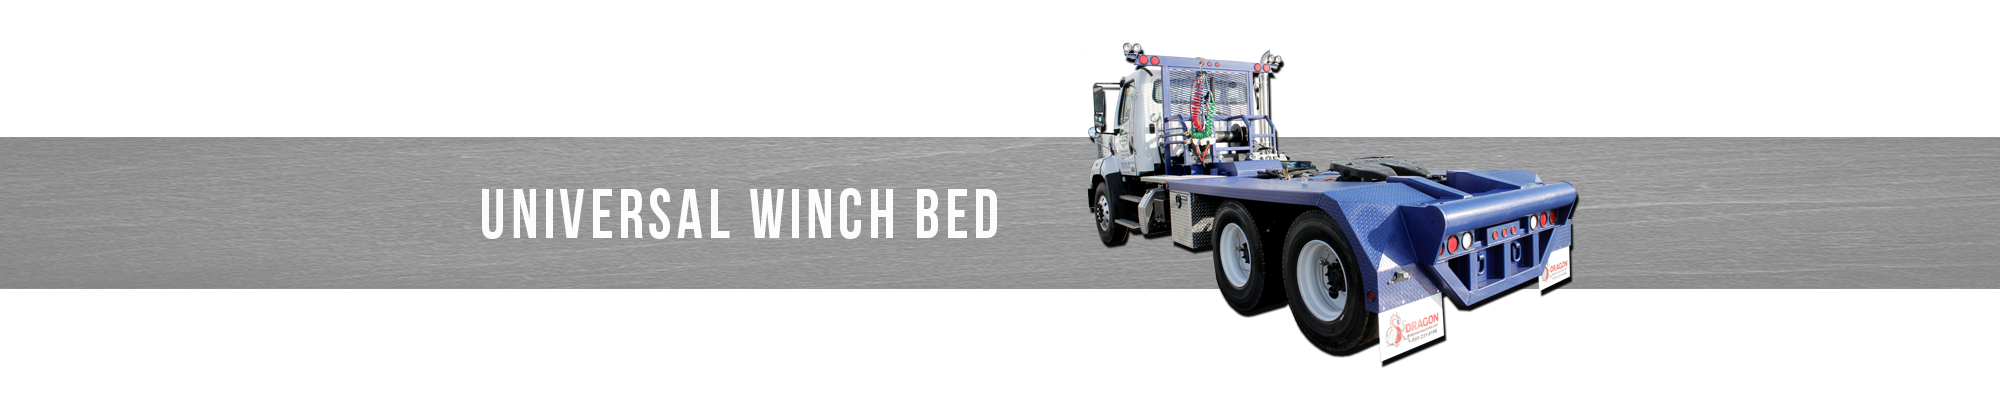 Universal Winch Bed